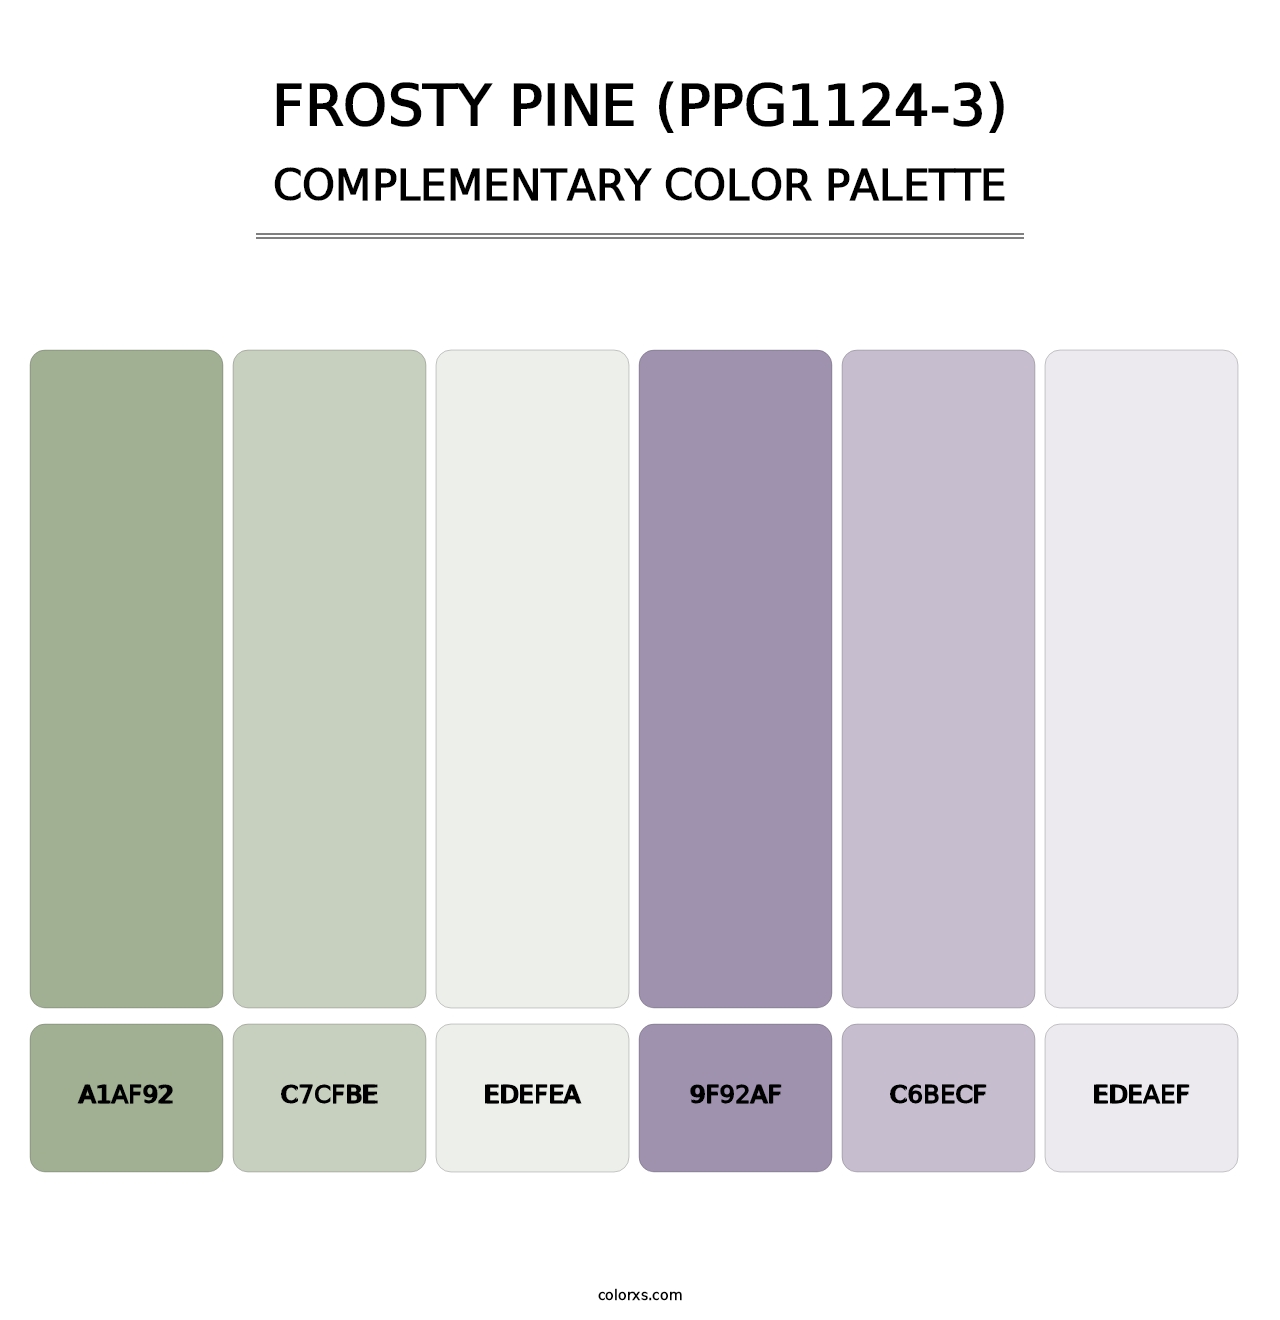 Frosty Pine (PPG1124-3) - Complementary Color Palette